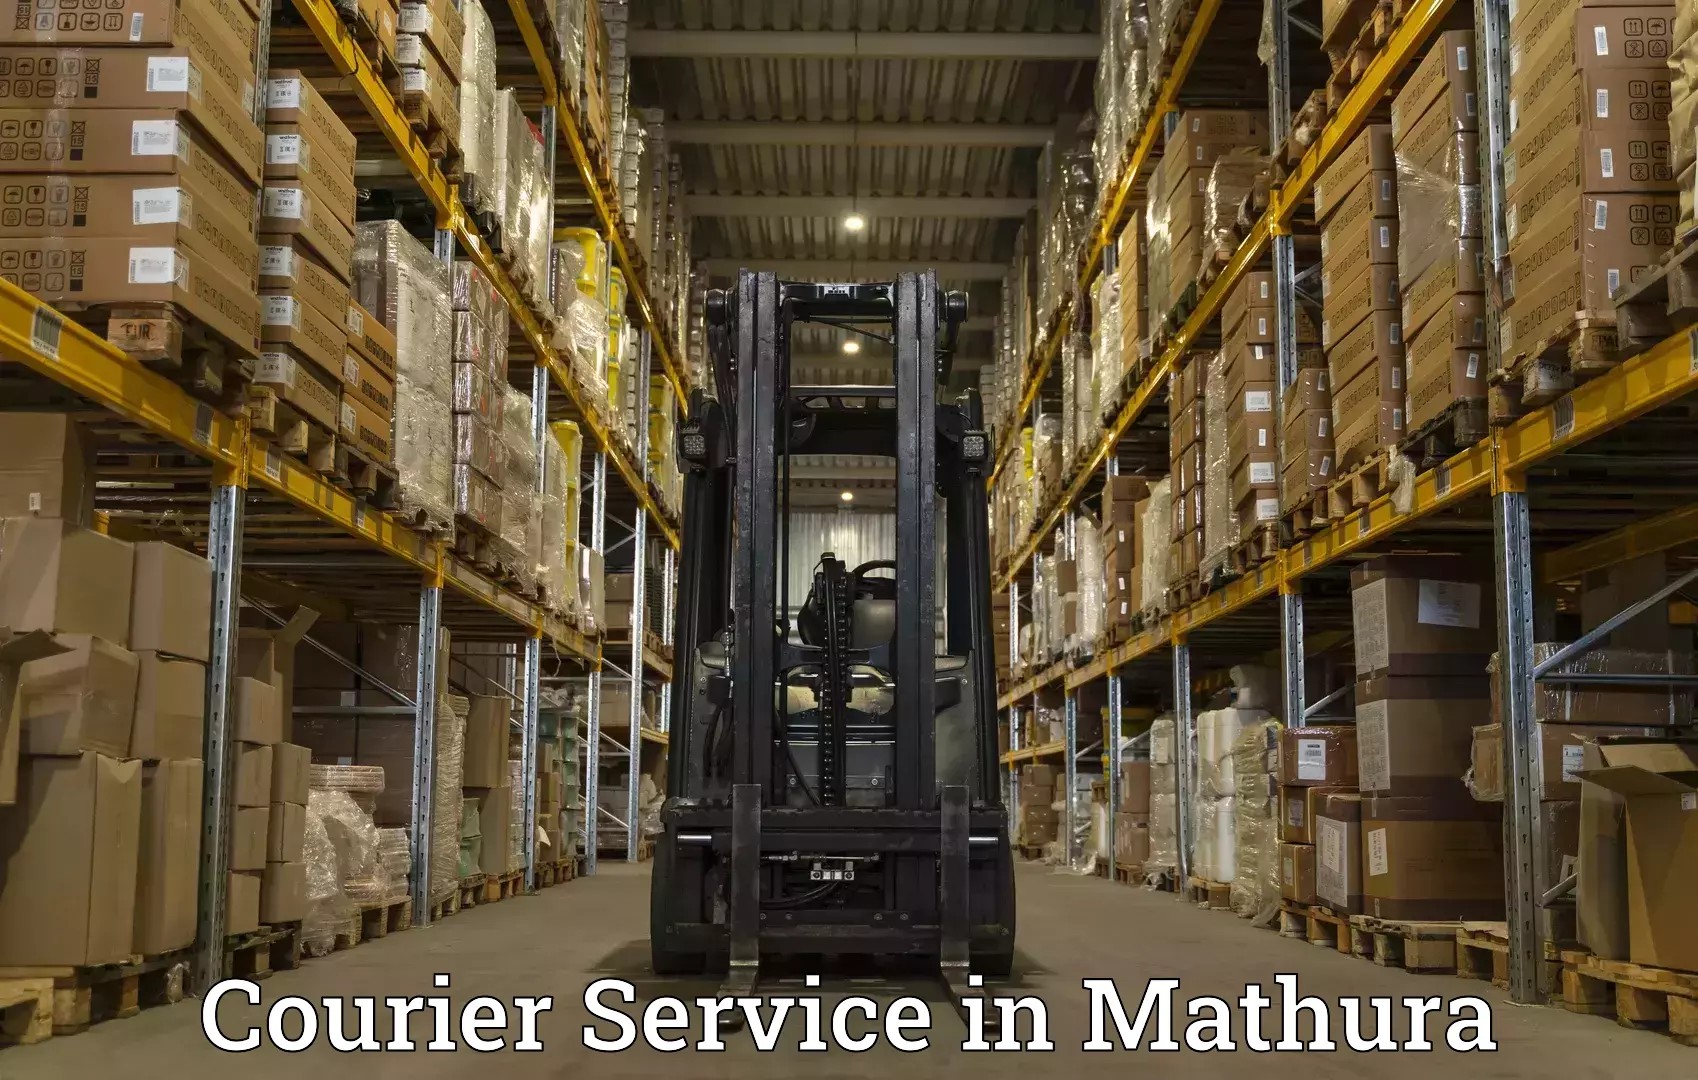 Express delivery capabilities in Mathura